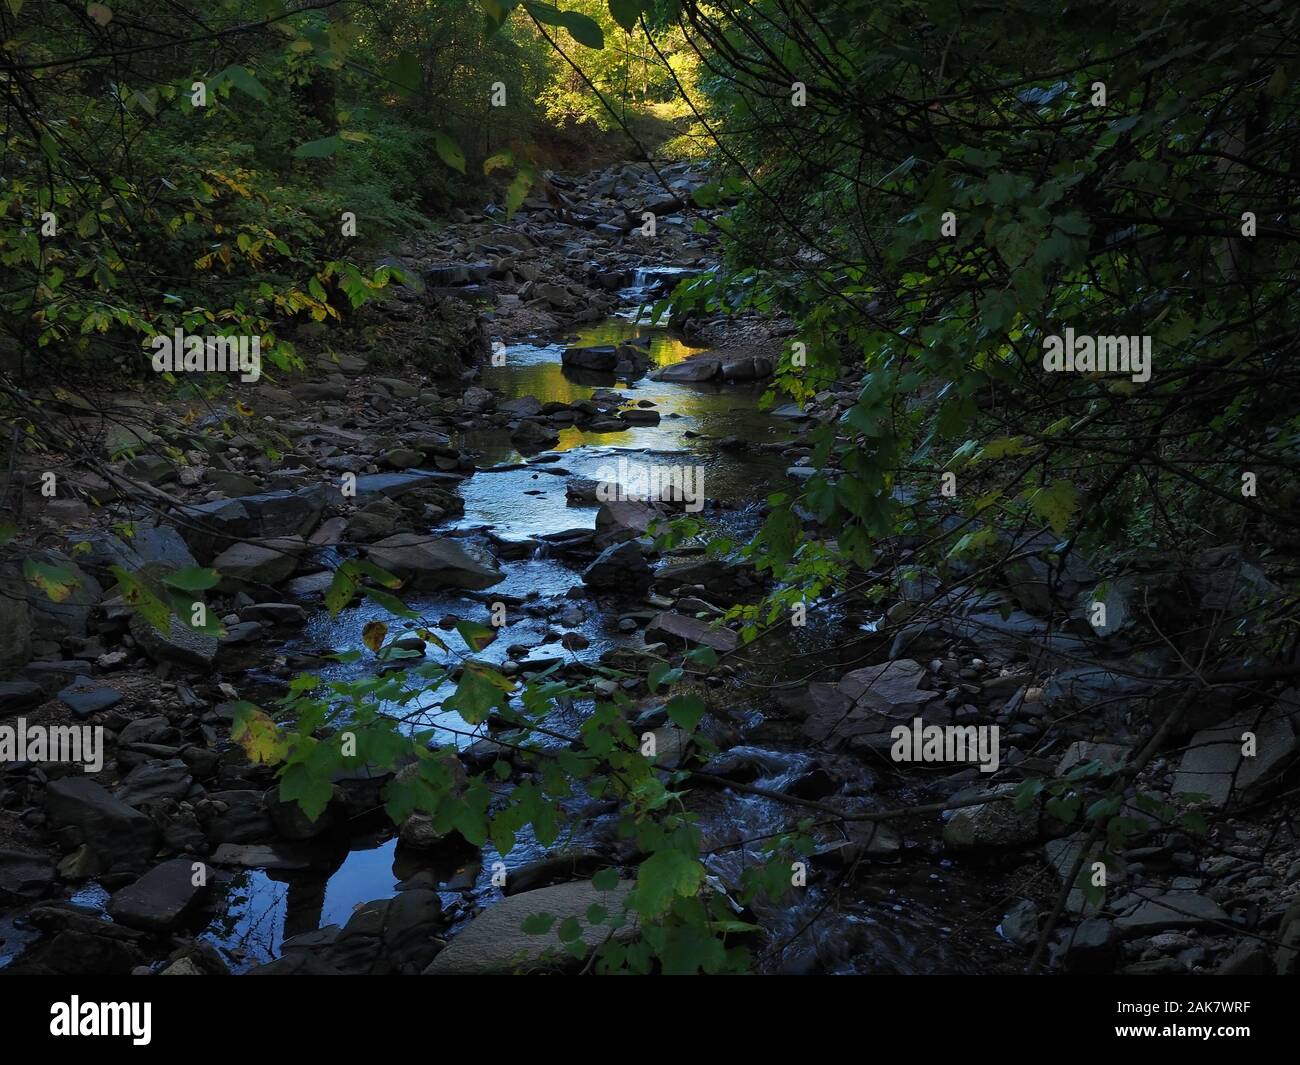 A little stream with rocks, pebbles and boulders meanders through a forest with green and gold foliage. Stock Photo